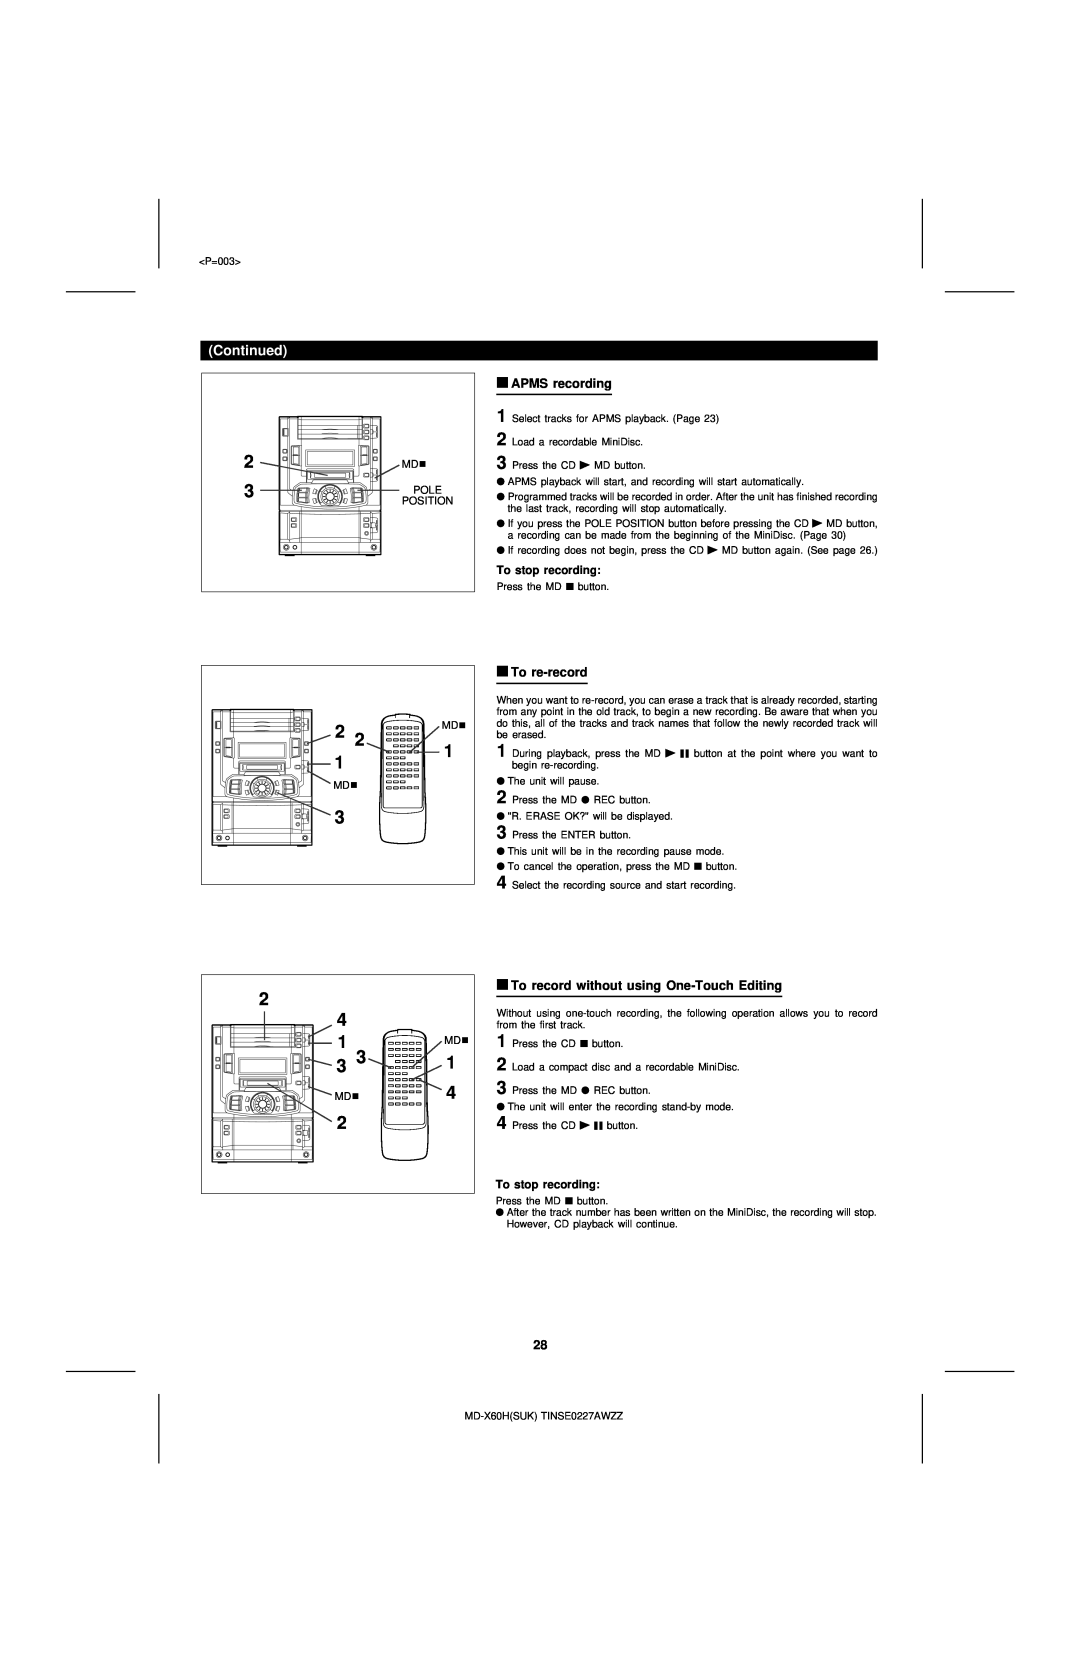 Sharp MD-X60H operation manual APMS recording, To re-record, To record without using One-TouchEditing 